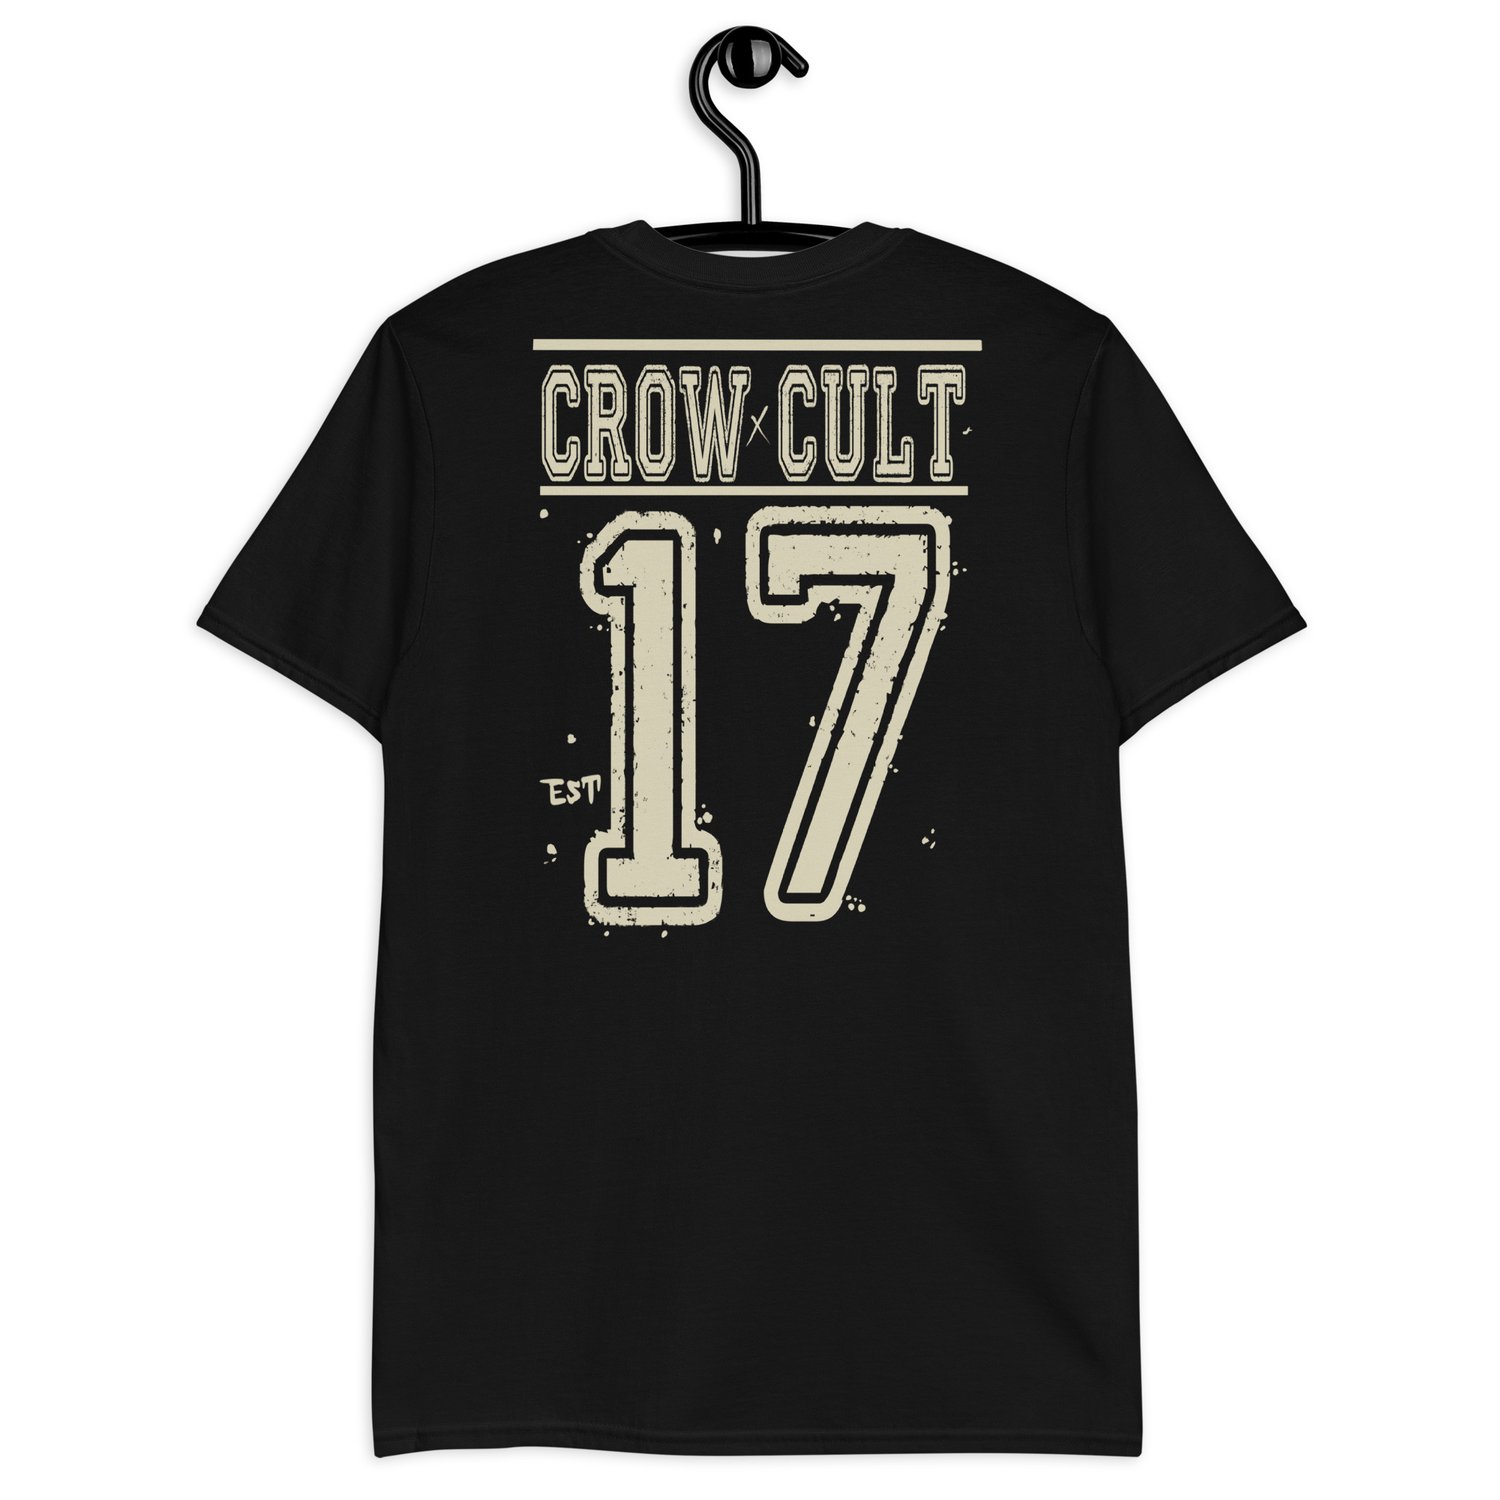 Image of Crow cult tee